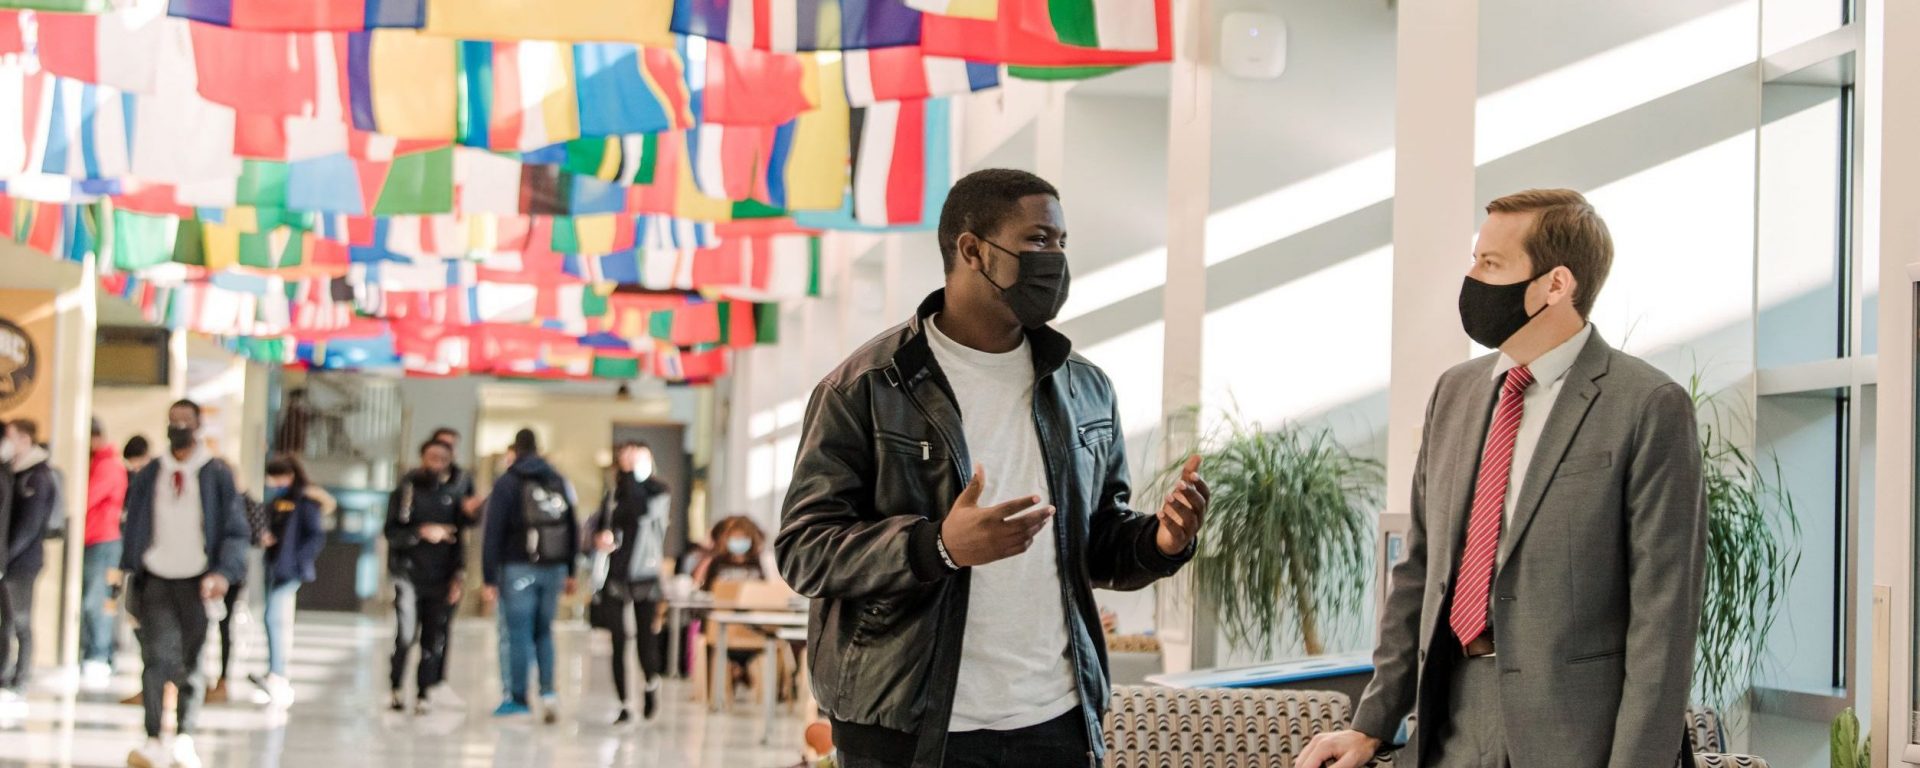 One-on-one: A conversation about UMBC’s global community